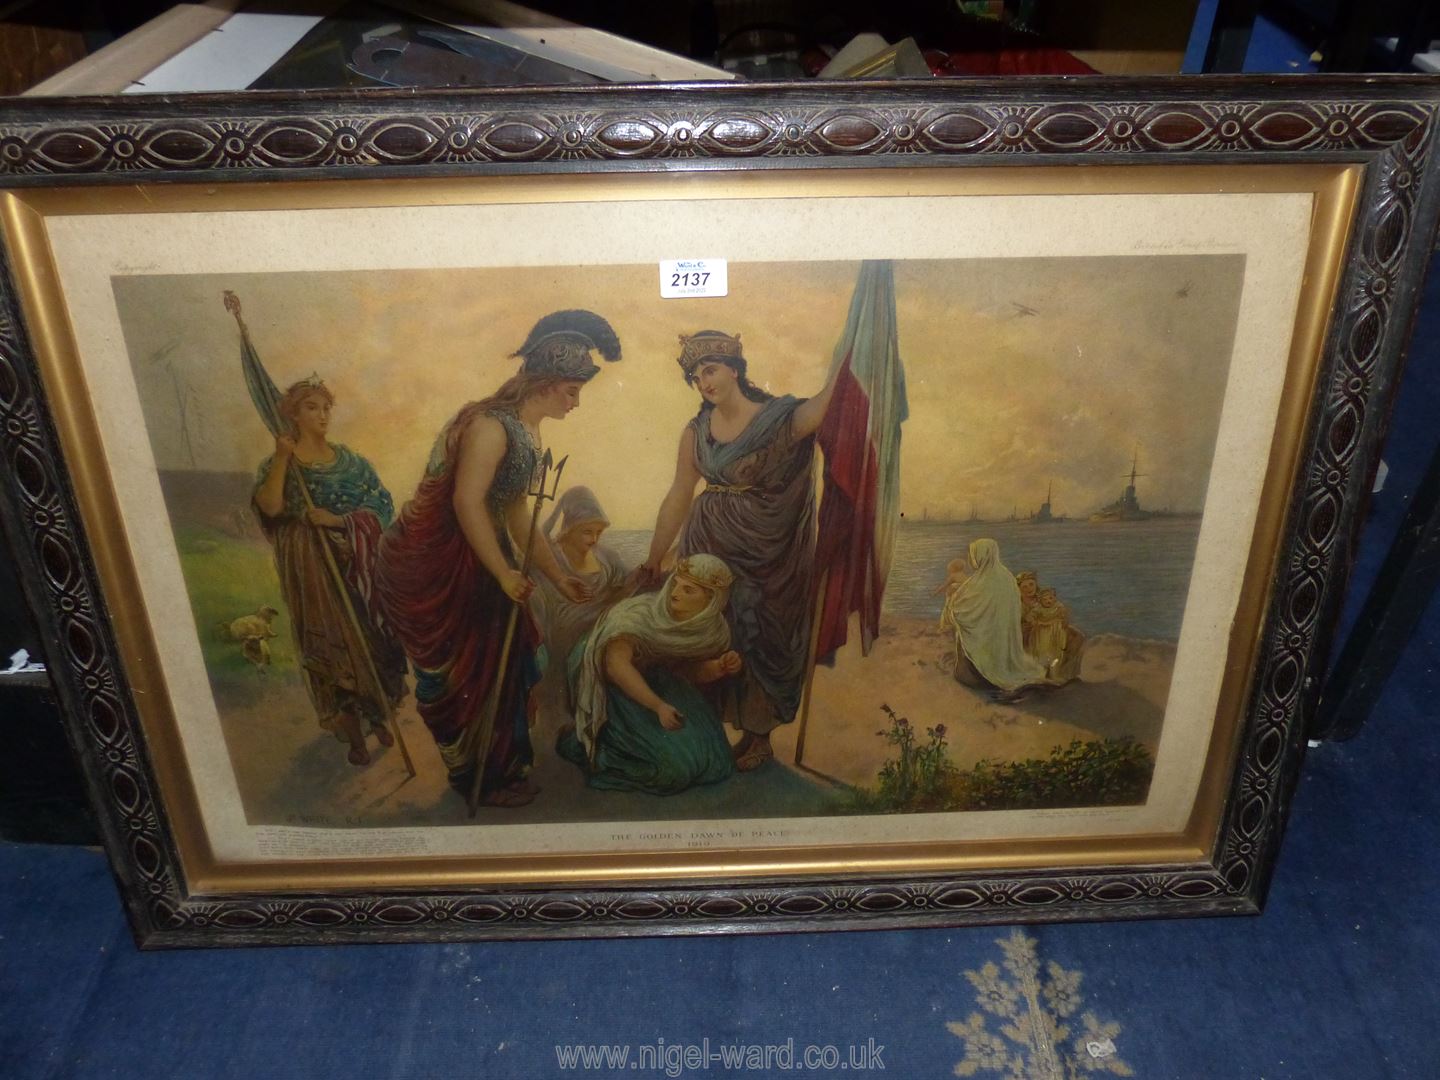 A large wooden framed J.M. White print ' The golden dawn of peace', 34 1/4" x 23 1/2".